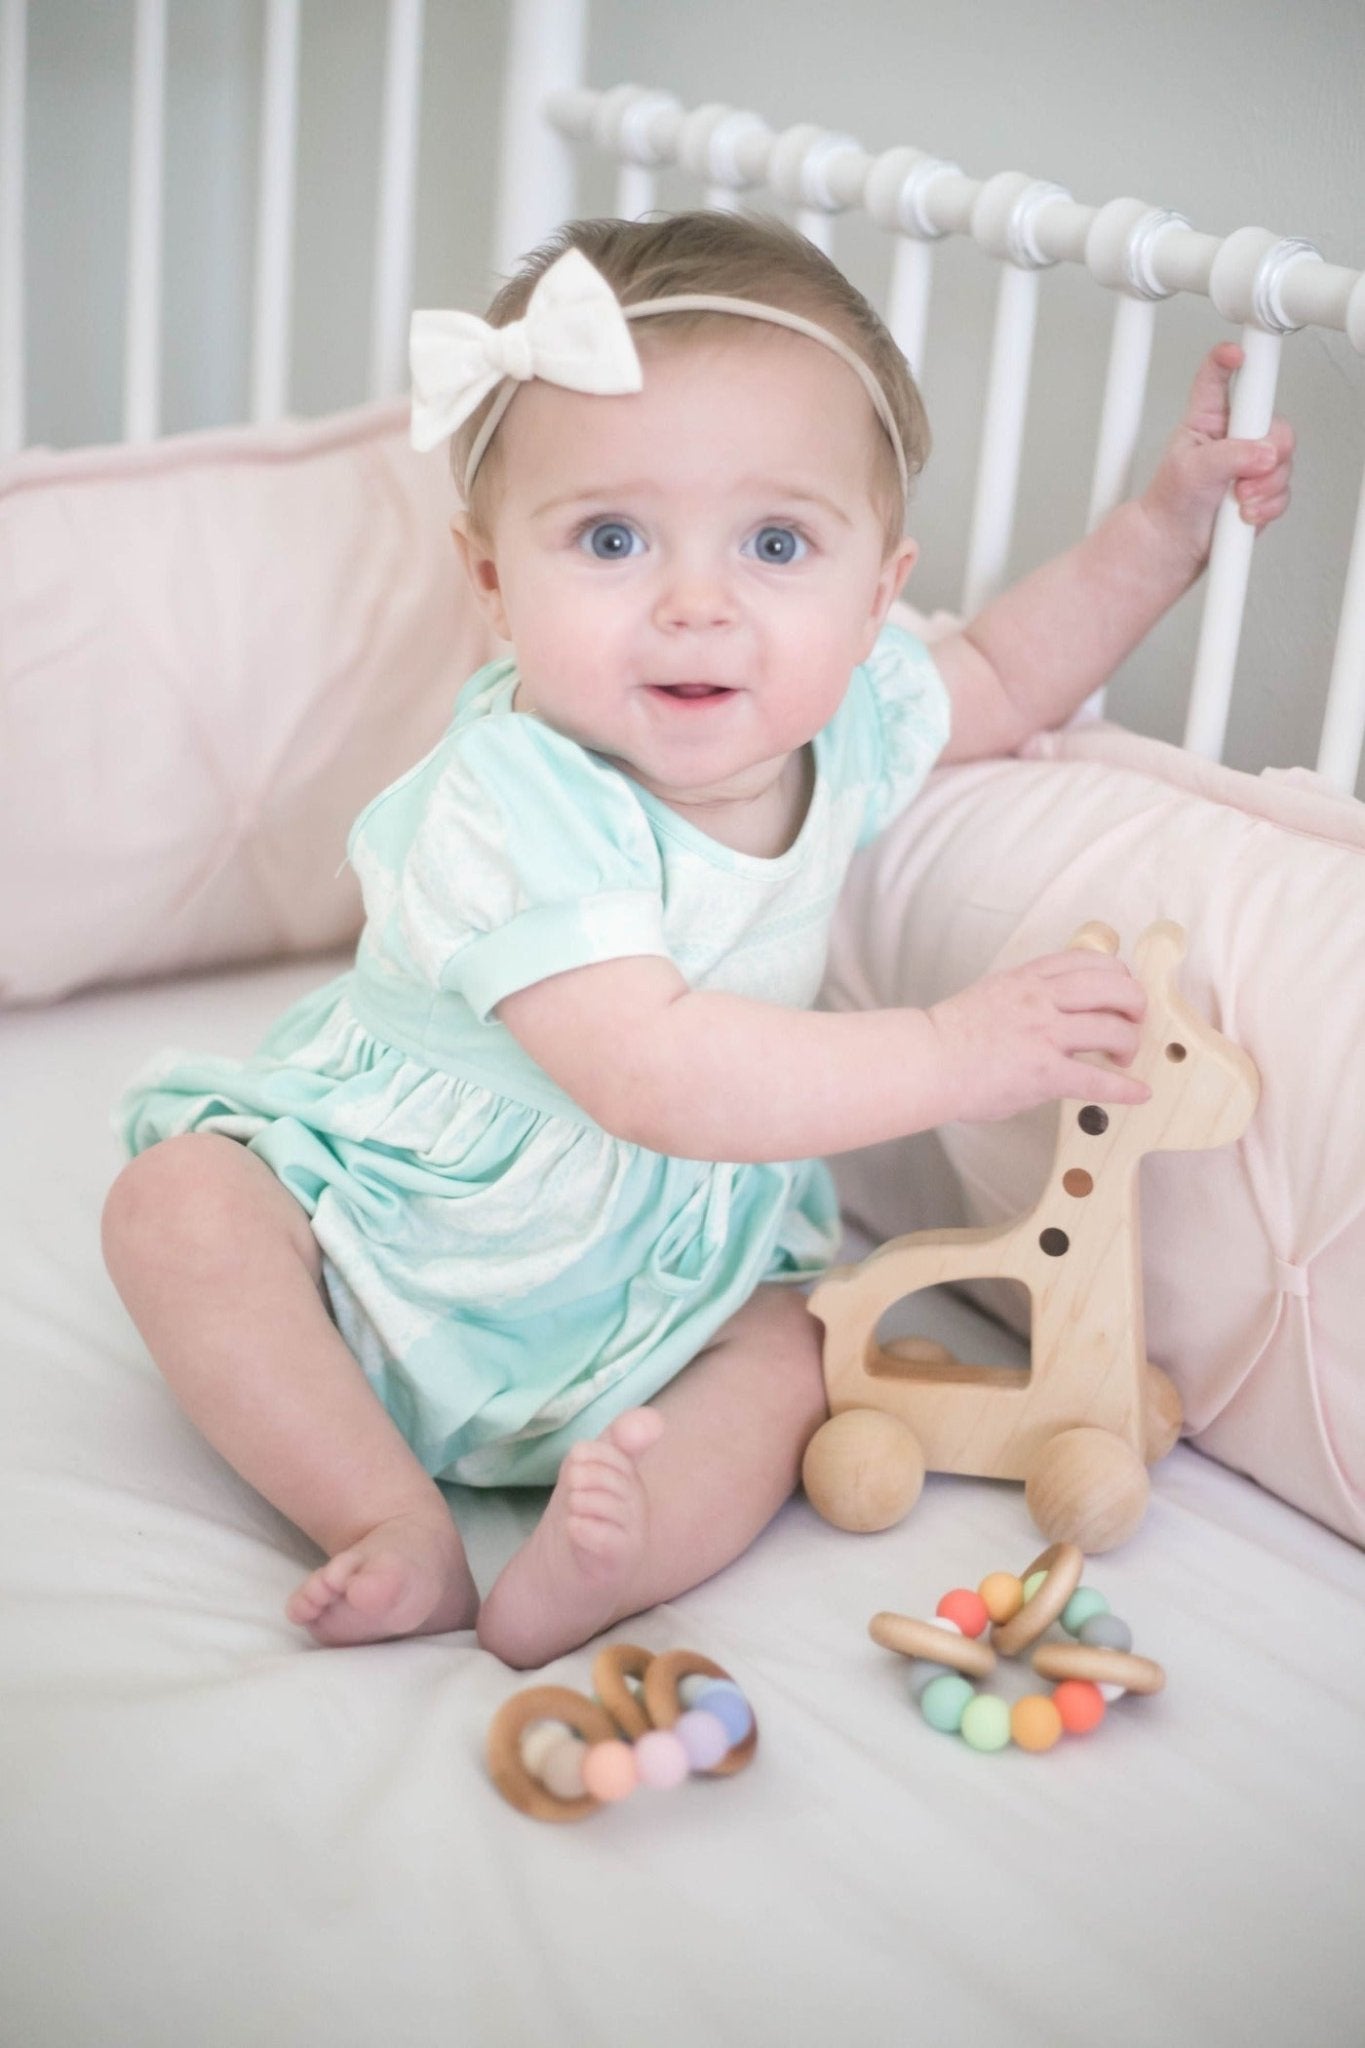 A photo of a baby pushing a wooden giraffe push toy. The baby is smiling and having fun.